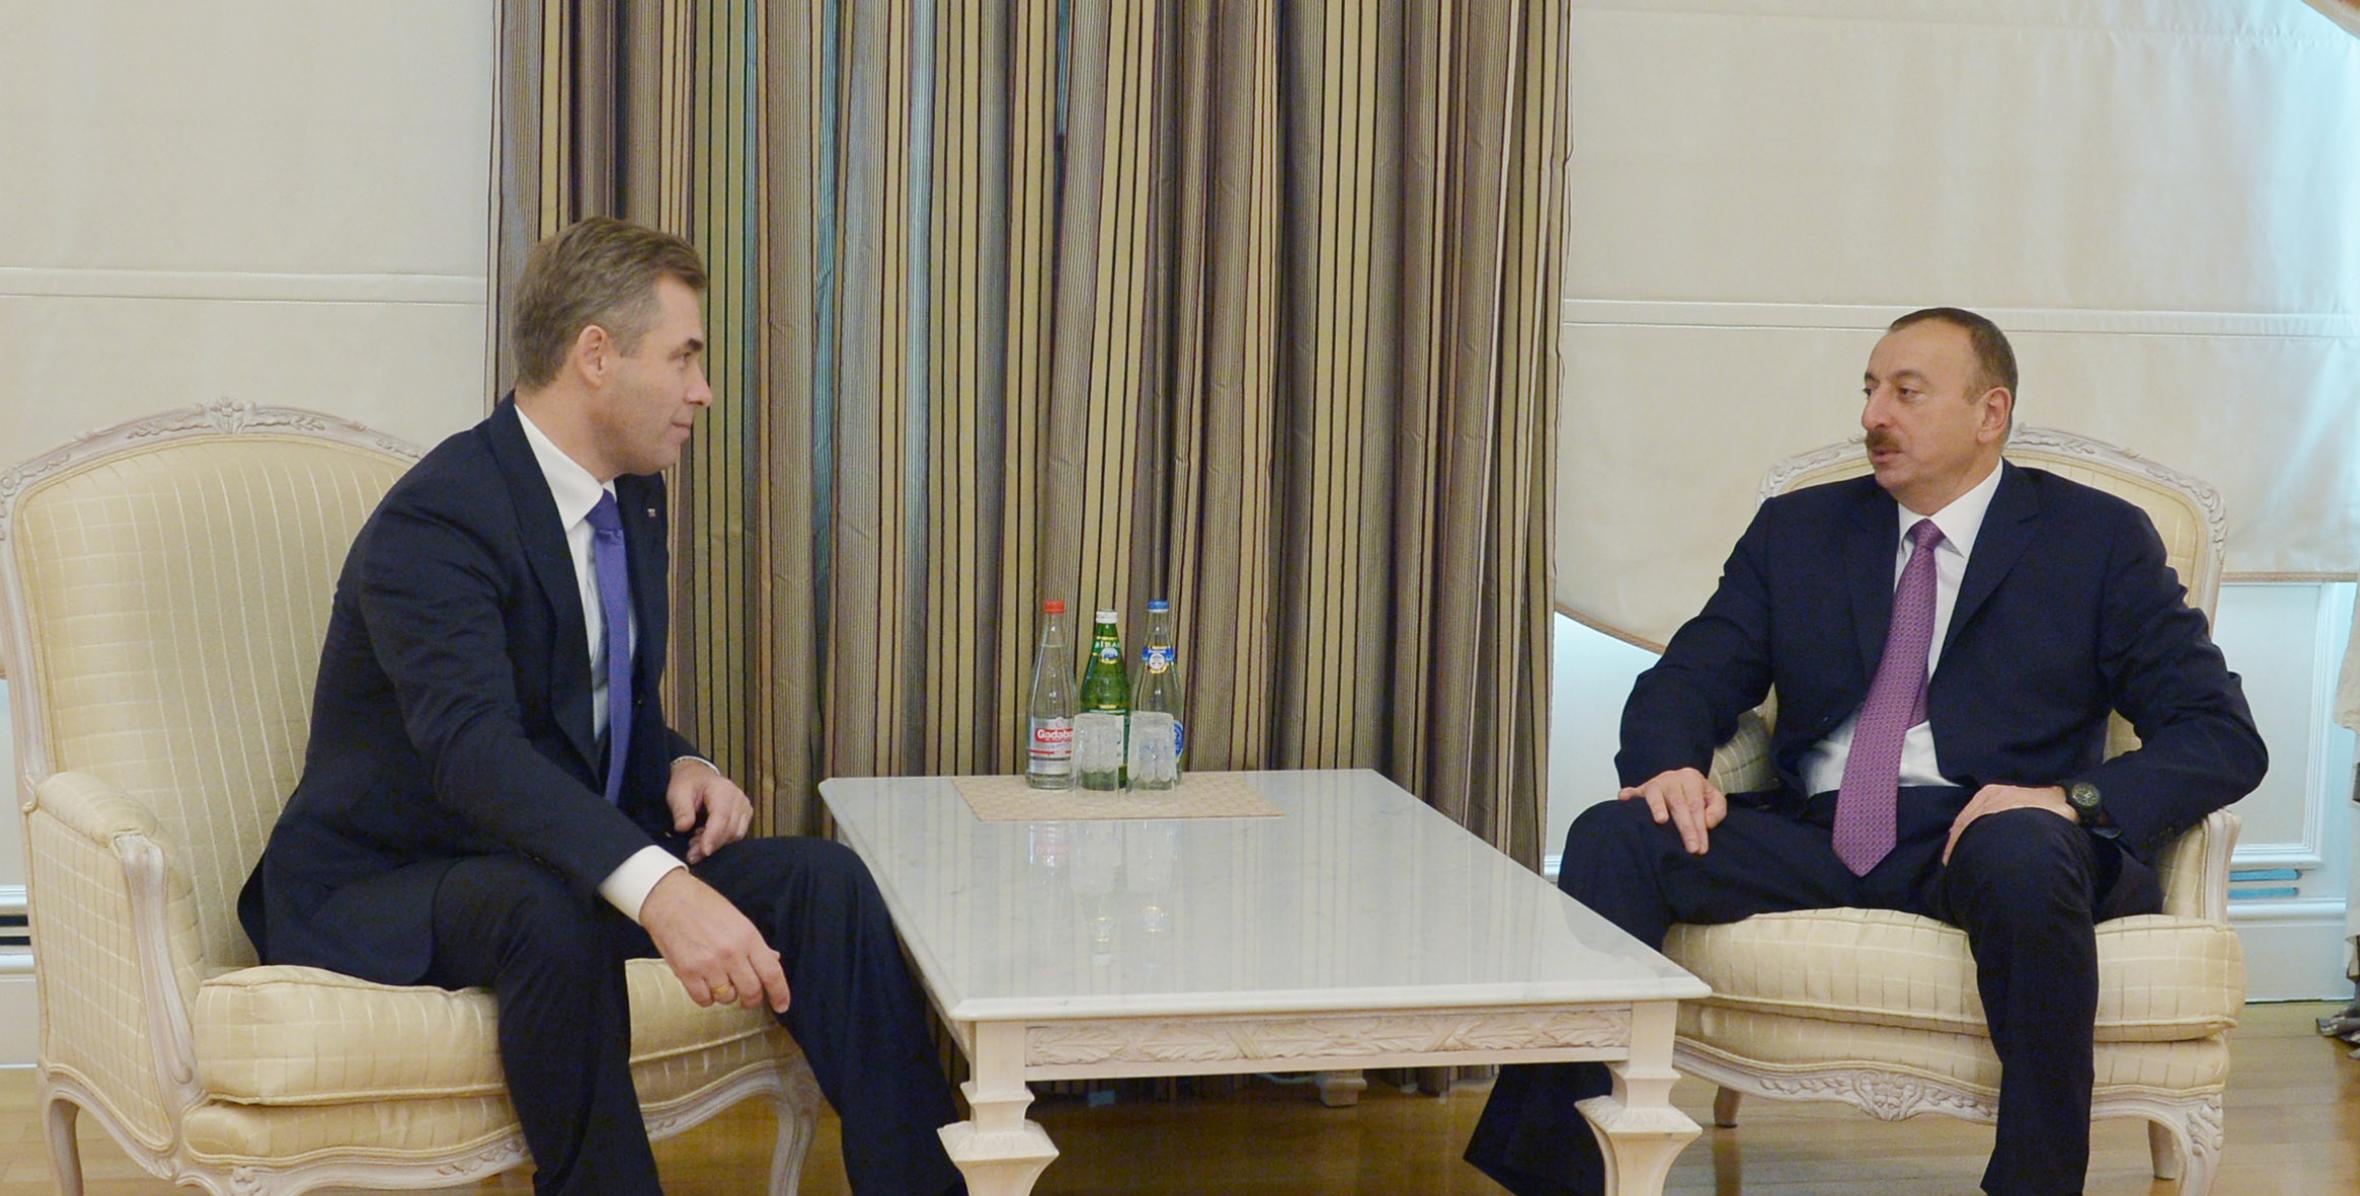 Ilham Aliyev received the Russian President’s Commissioner for Children's Rights